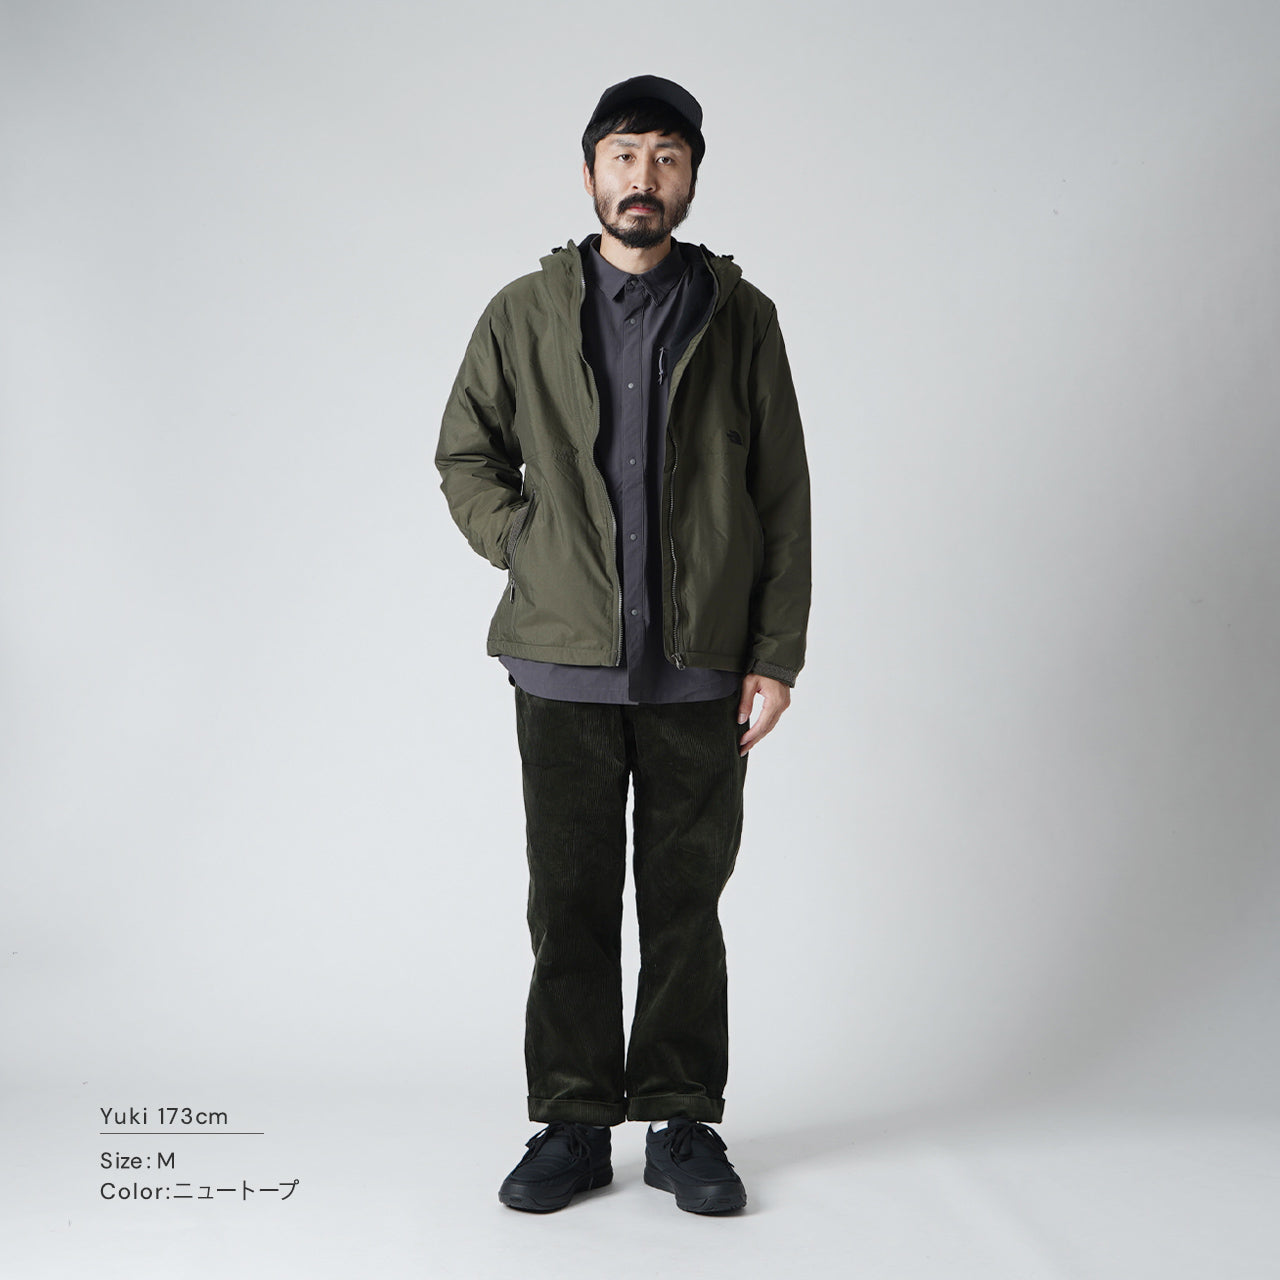 【SALE！20%OFF】THE NORTH FACE ノースフェイス コンパクト ノマド ジャケット Compact Nomad Jacket  NP72330【送料無料】